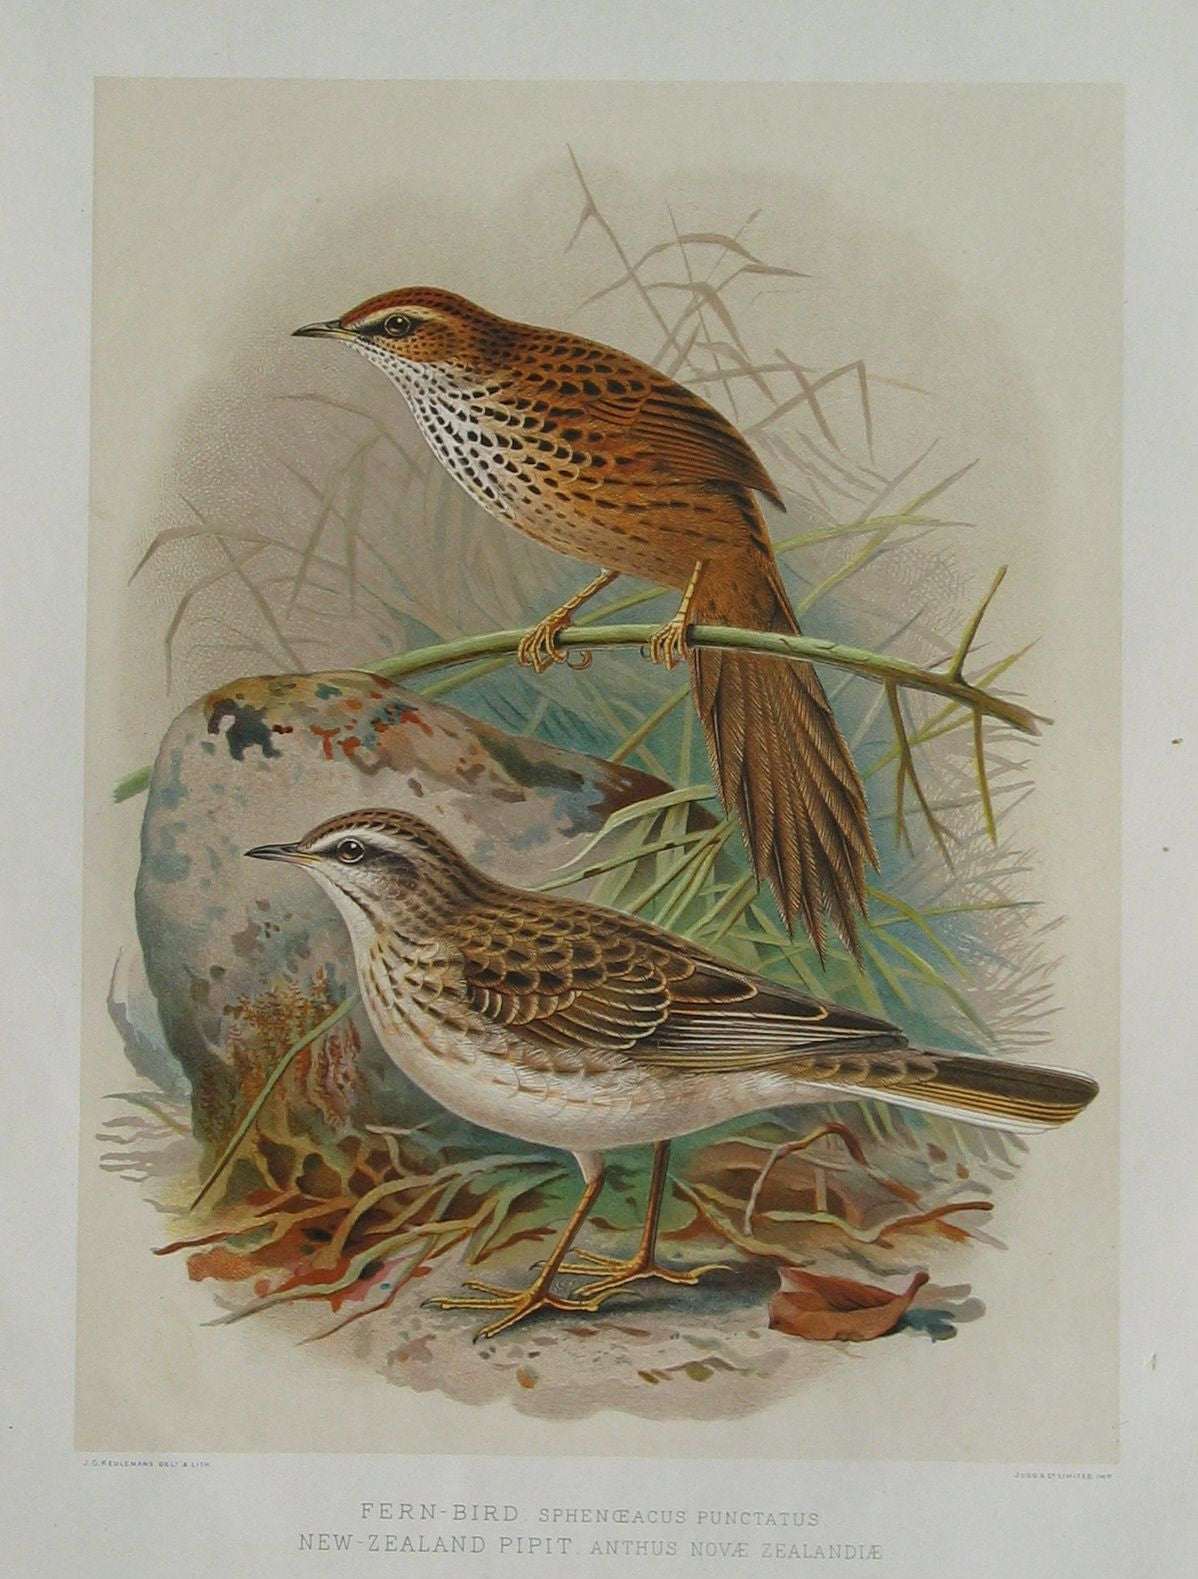 Fern Bird and New Zealand Pipit